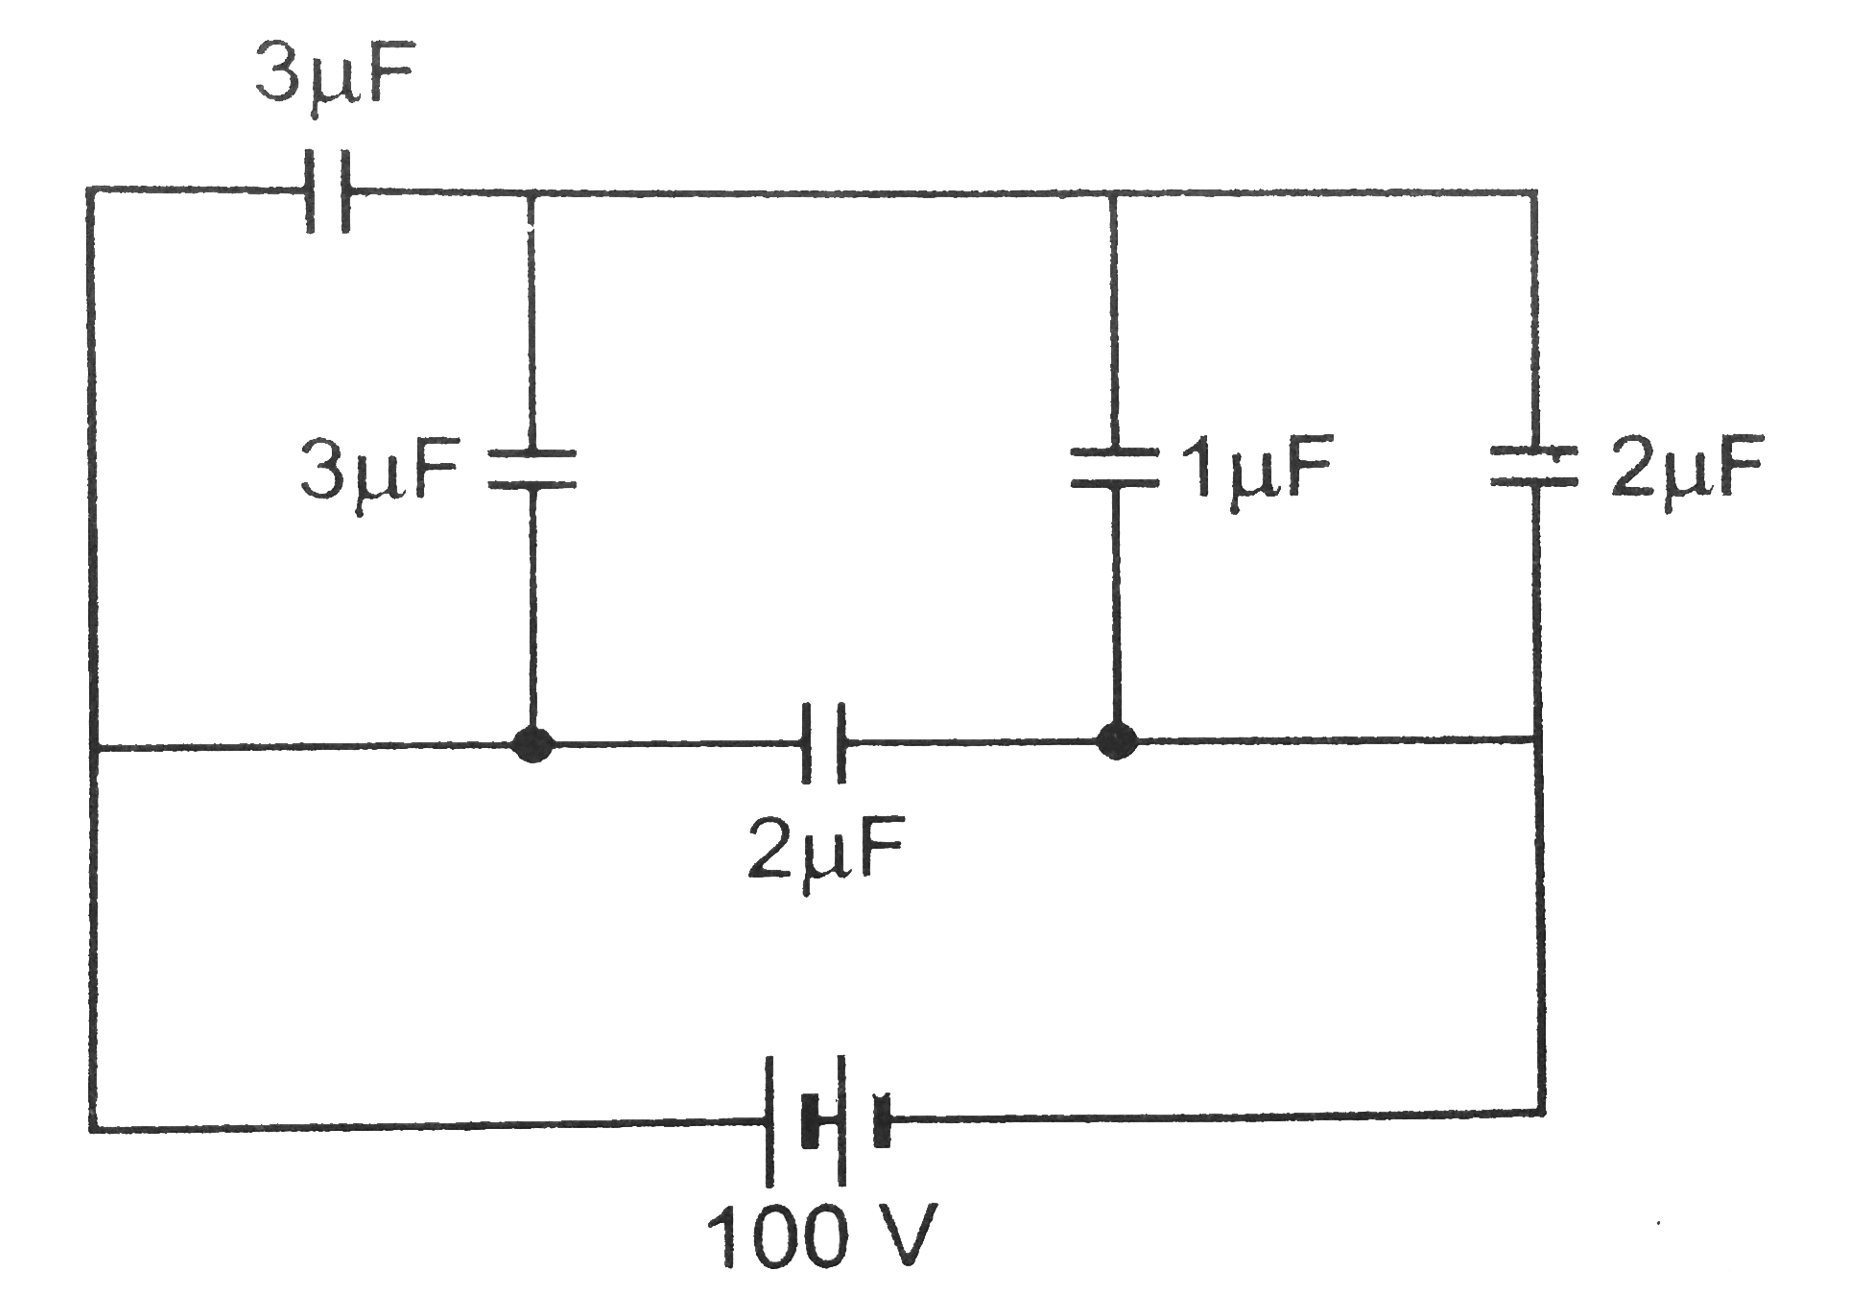 Fig, shows a network of five capacitors connected to a 100 V supply. Calculate the total charge and energy stored in the network.